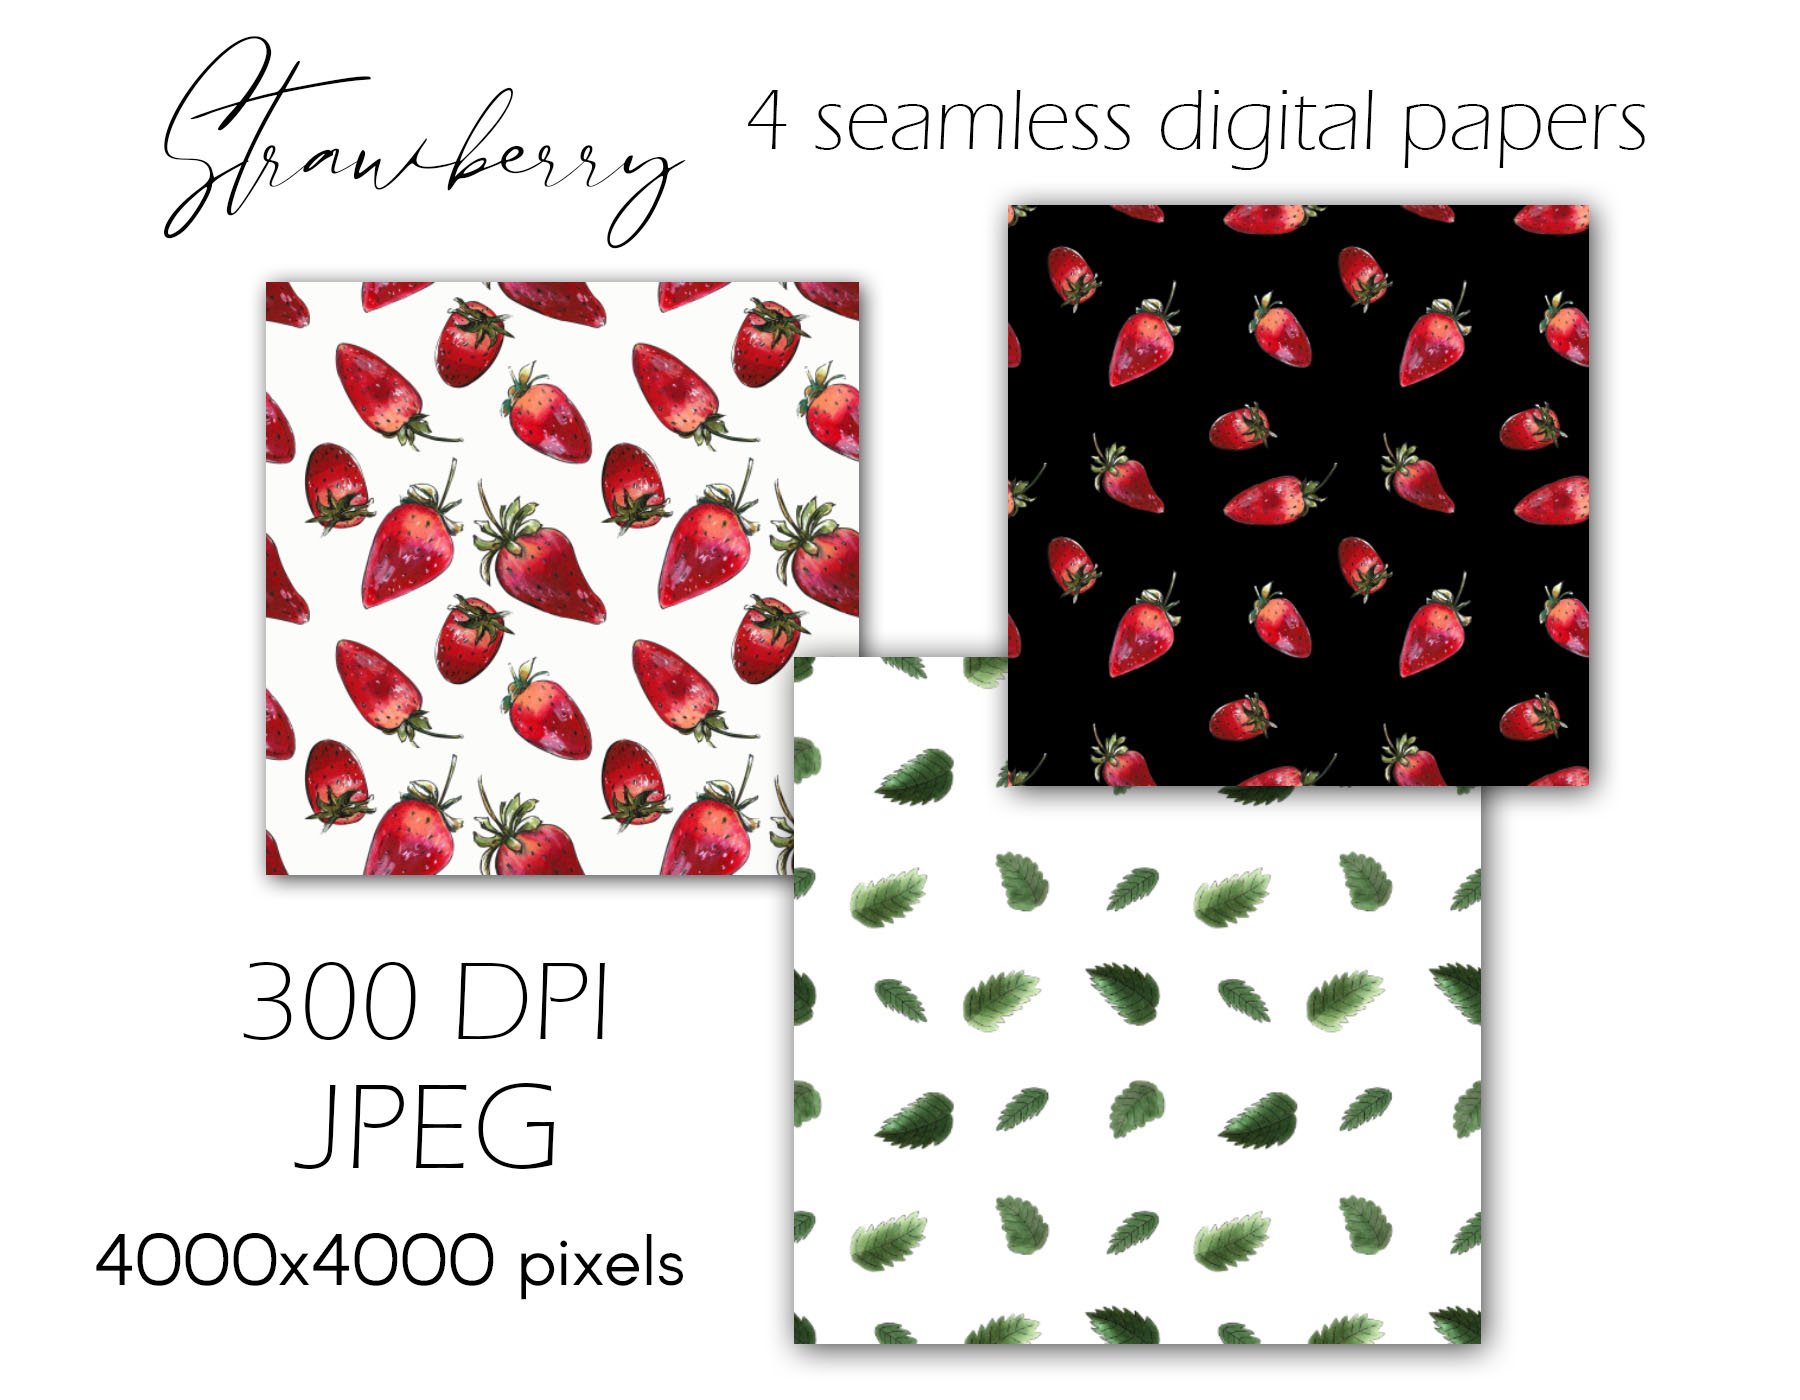 Black lettering "Strawberry" and 3 different seamless digital papers with strawberry.